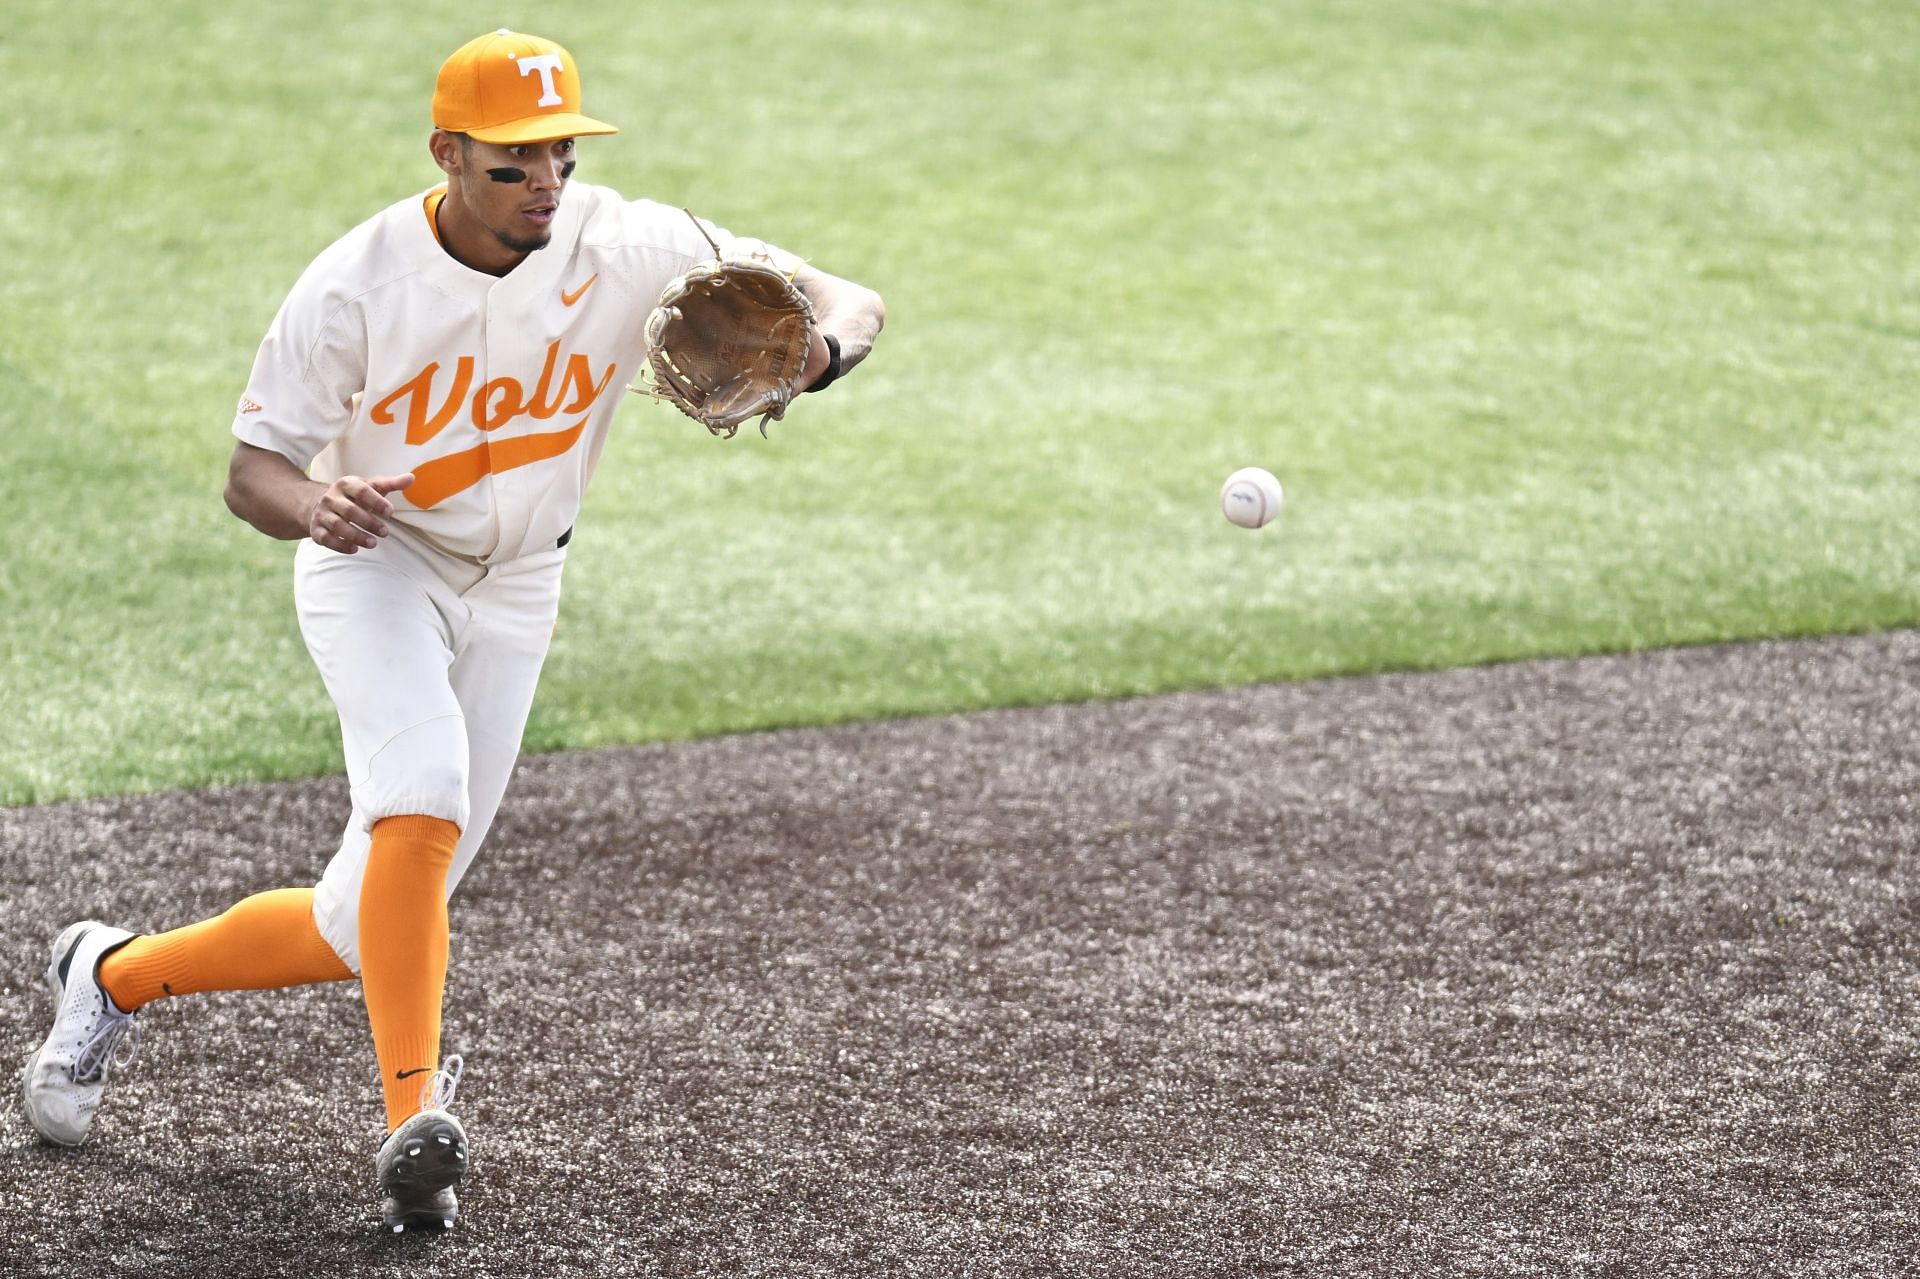 Tennessee baseball earns first CWS win since 2001